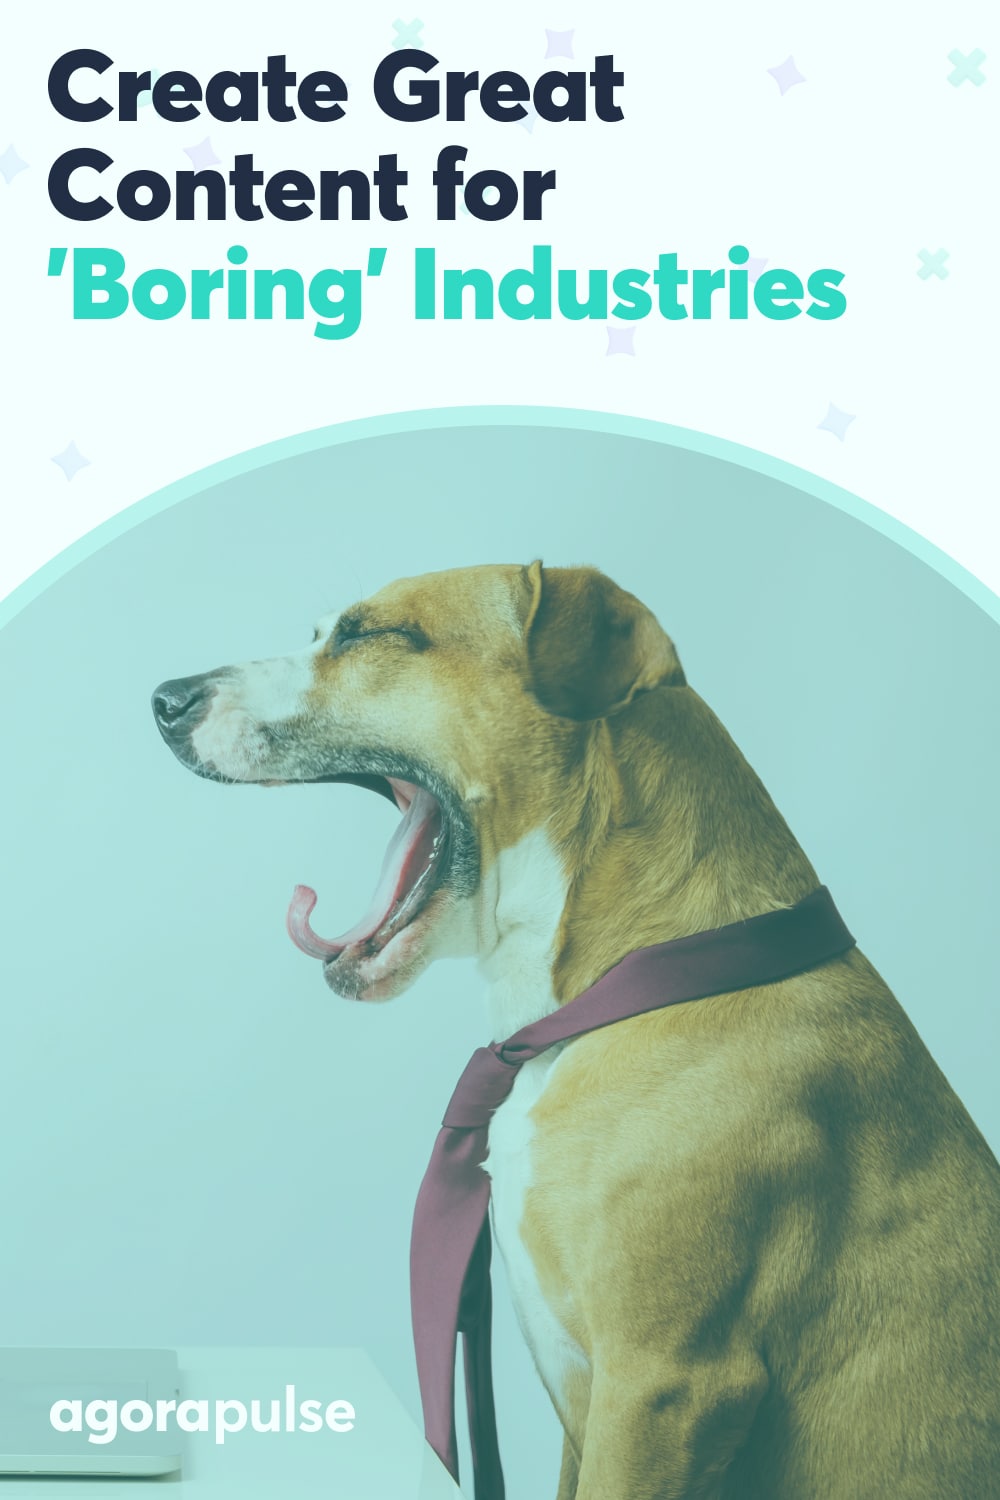 How to Create Great Social Media Content in a “Boring” Industry